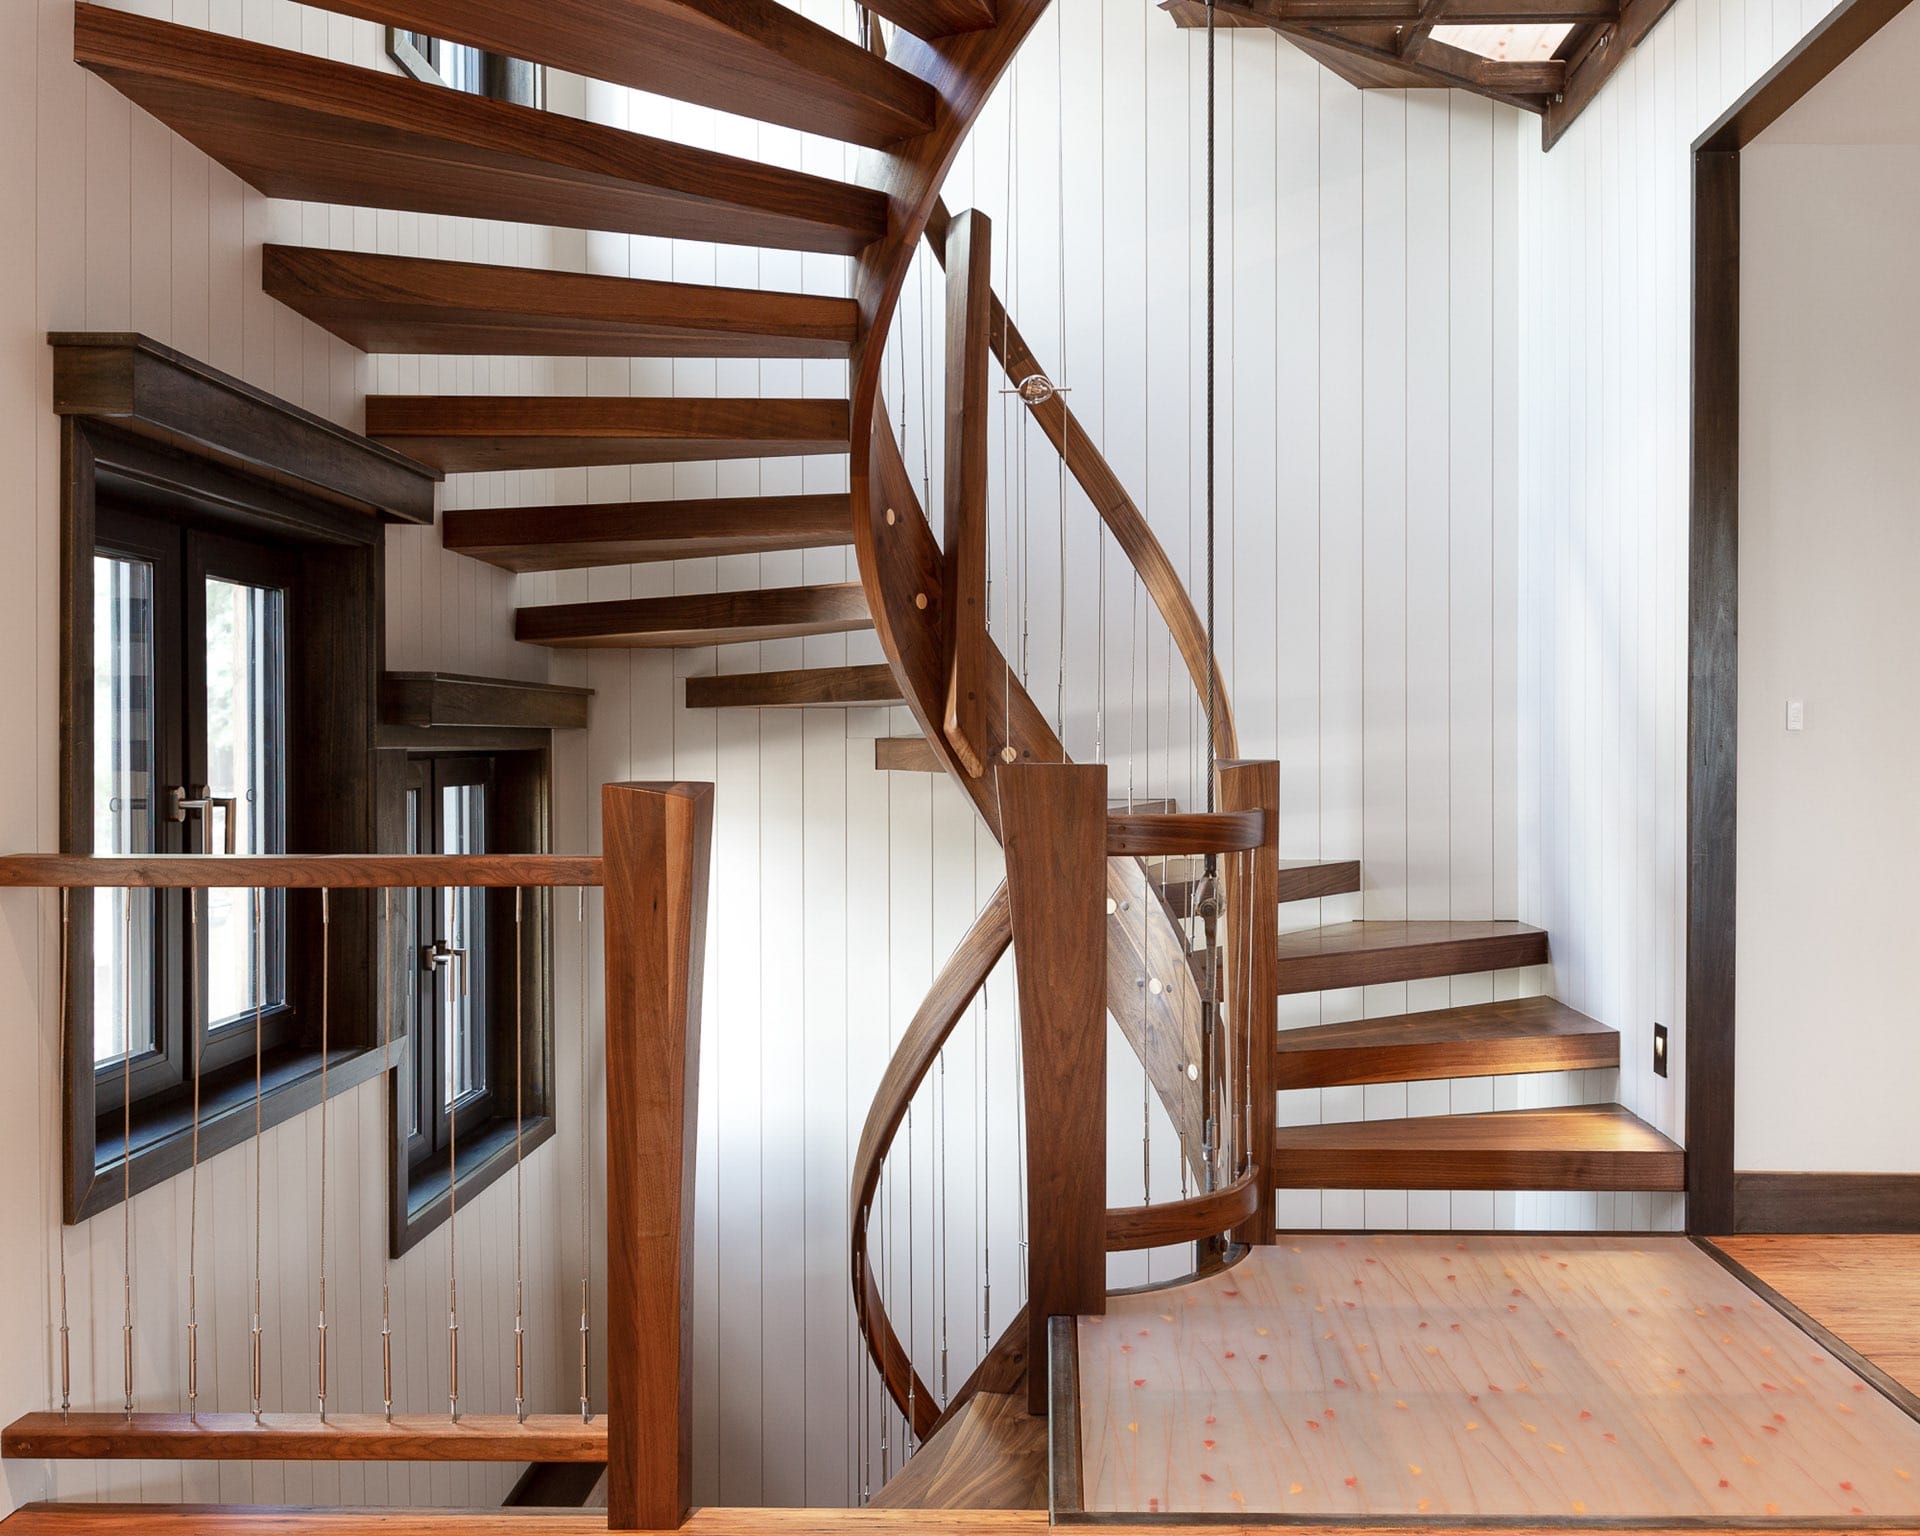 Stairs, Park Ave Renovation - architectural design by Elliott Workgroup